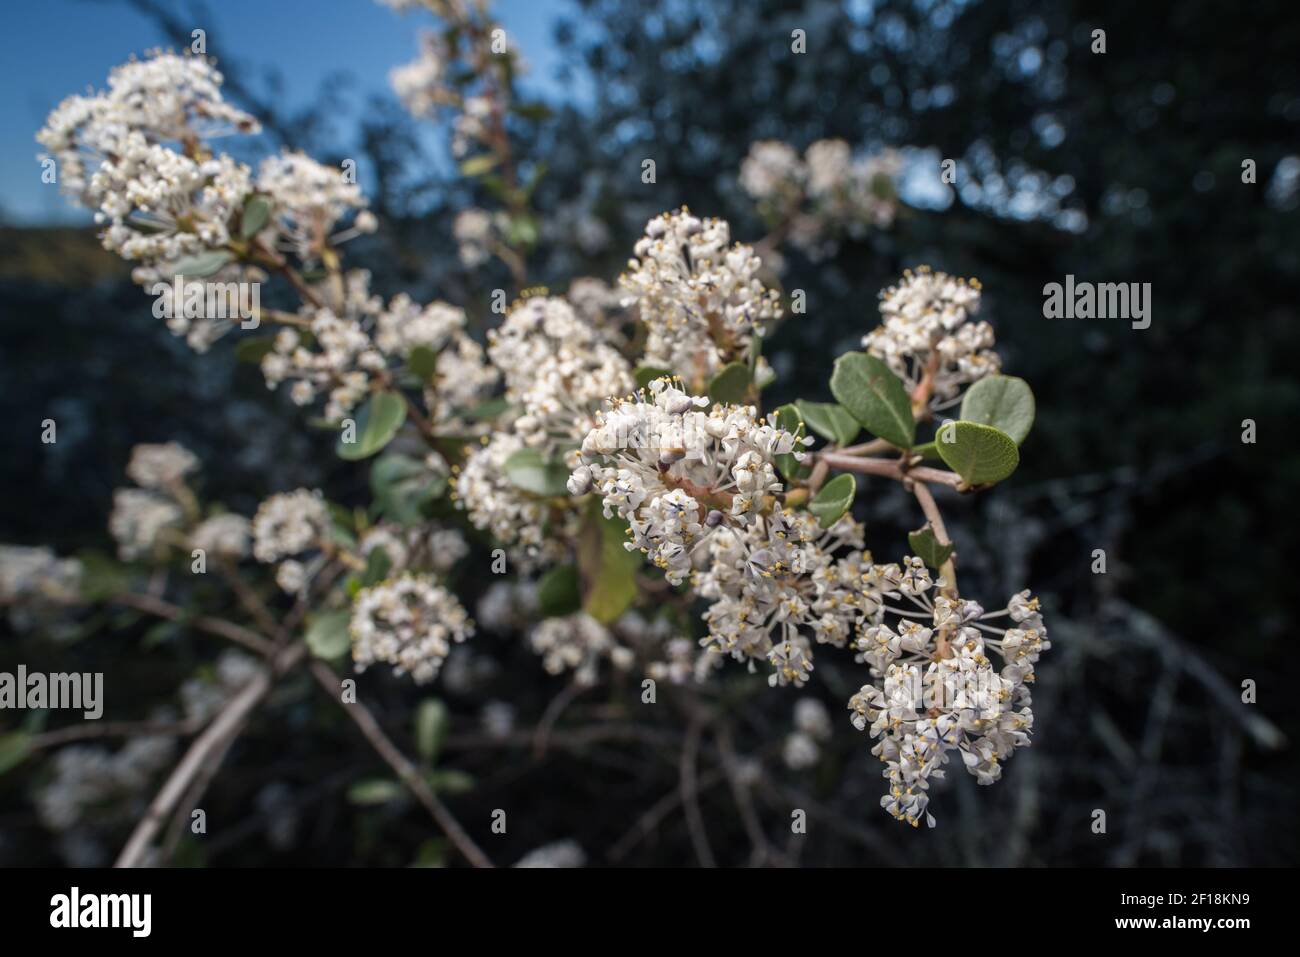 A flowering Buckbrush (Ceanothus cuneatus) in the Rhamnaceae or buckthorn family growing in the San Francisco Bay area of California. Stock Photo